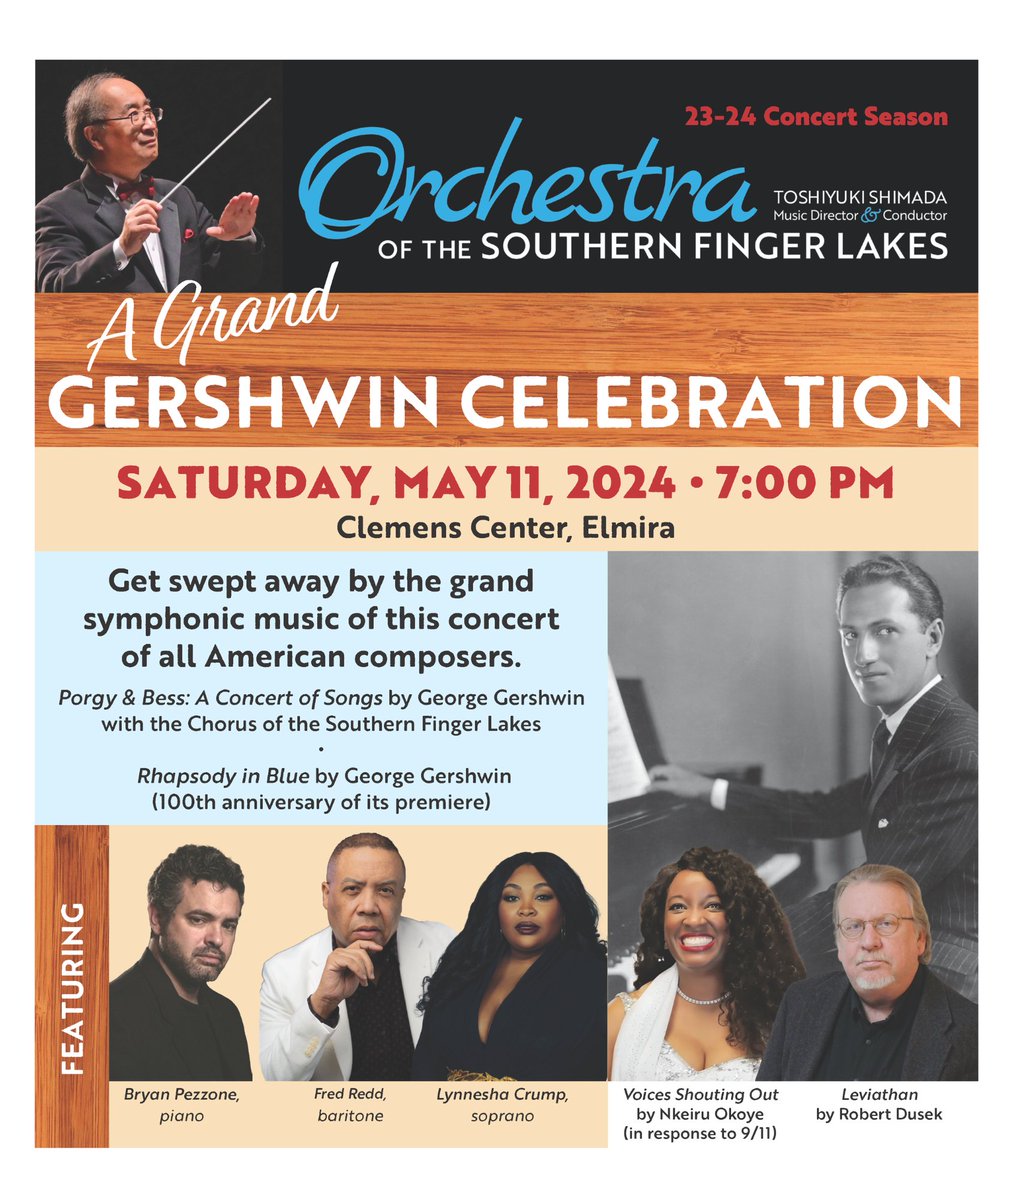 What’s your favorite Gershwin tune? Comment below! Join us for 'A Grand Gershwin Celebration' to hear our favorites live on May 11th!

Tickets at clemenscenter.org/event/orchestr….  

Questions? Call the OSFL at 607-936-2873!

#gershwinfavorites #orchestra #osfl #togetherwearesound